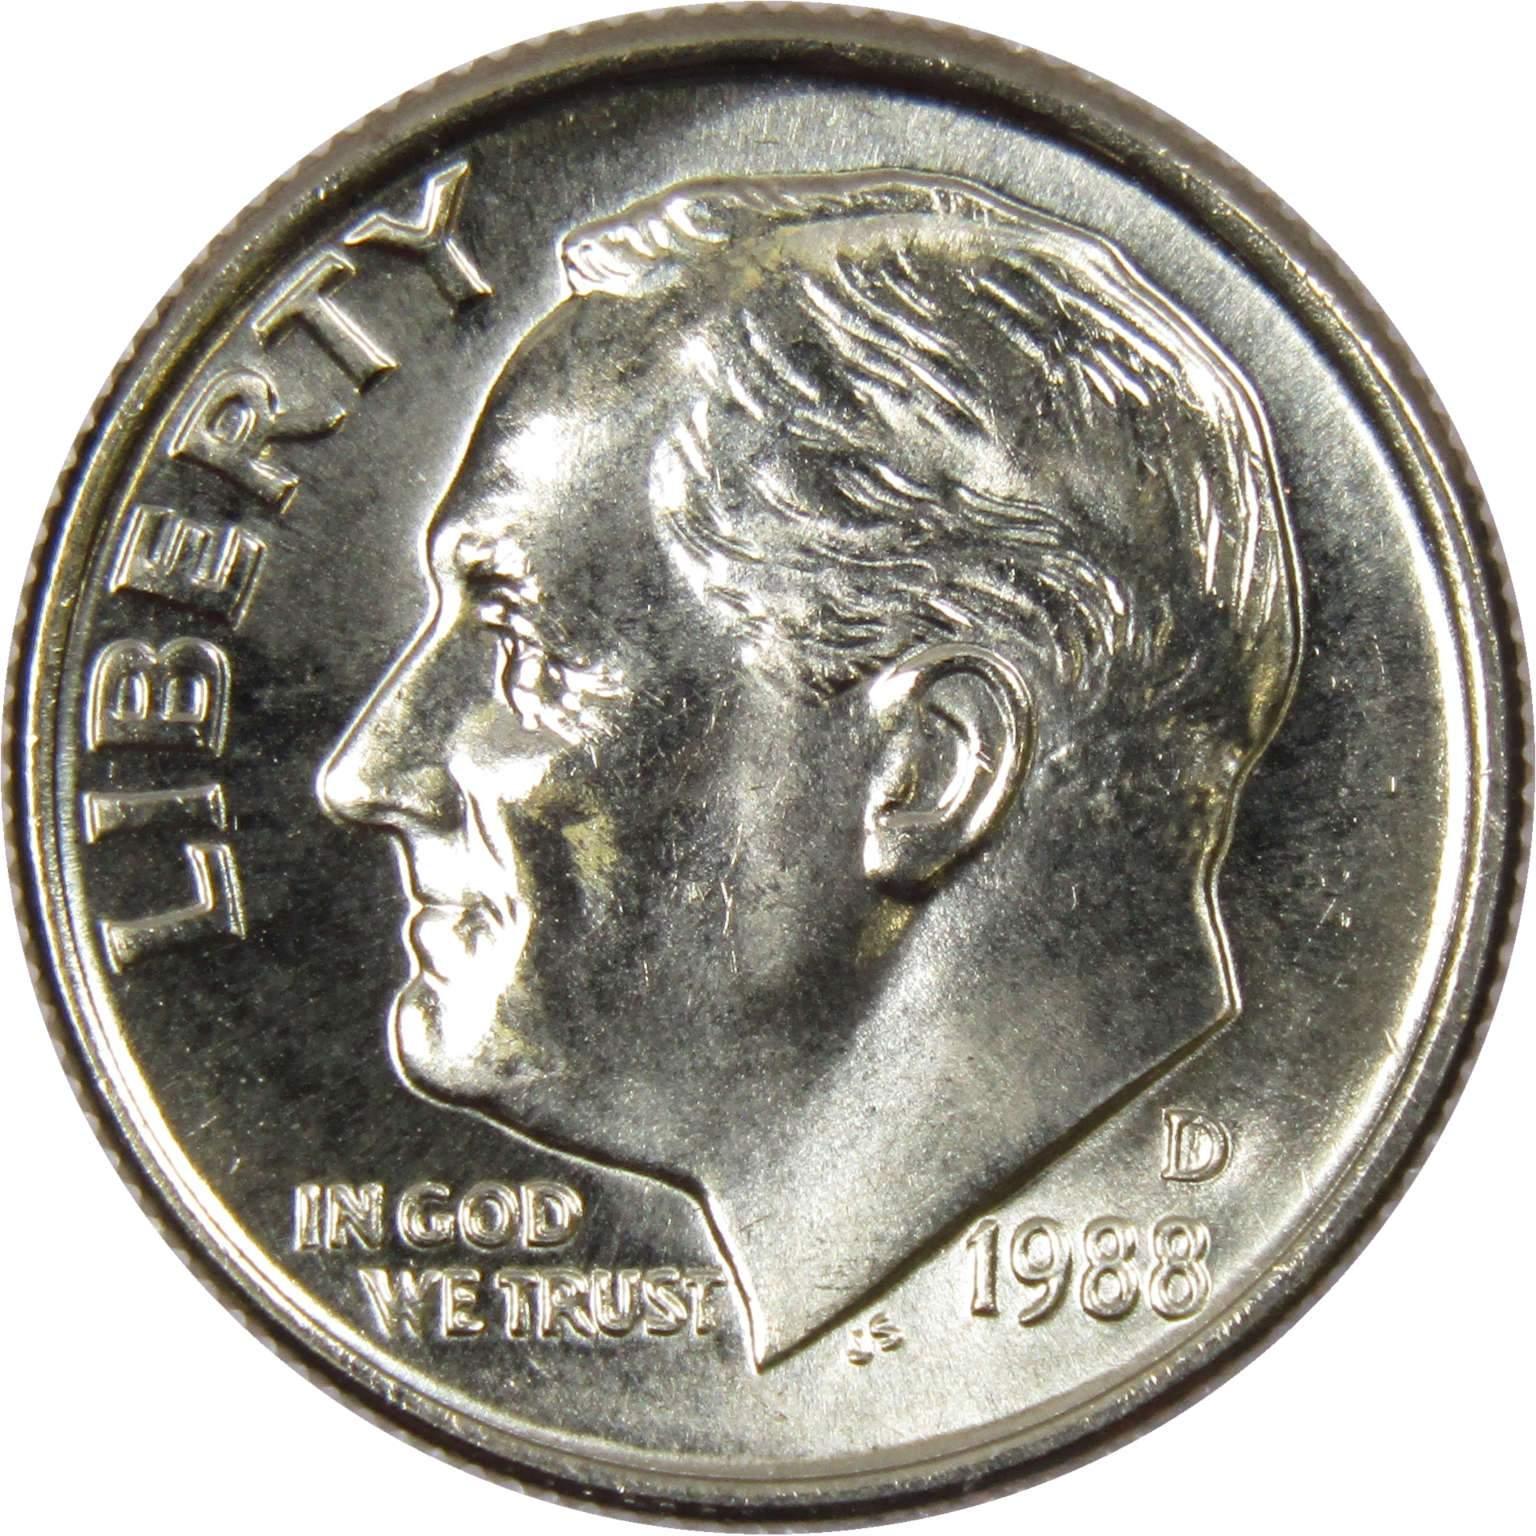 1988 D Roosevelt Dime BU Uncirculated Mint State 10c US Coin Collectible